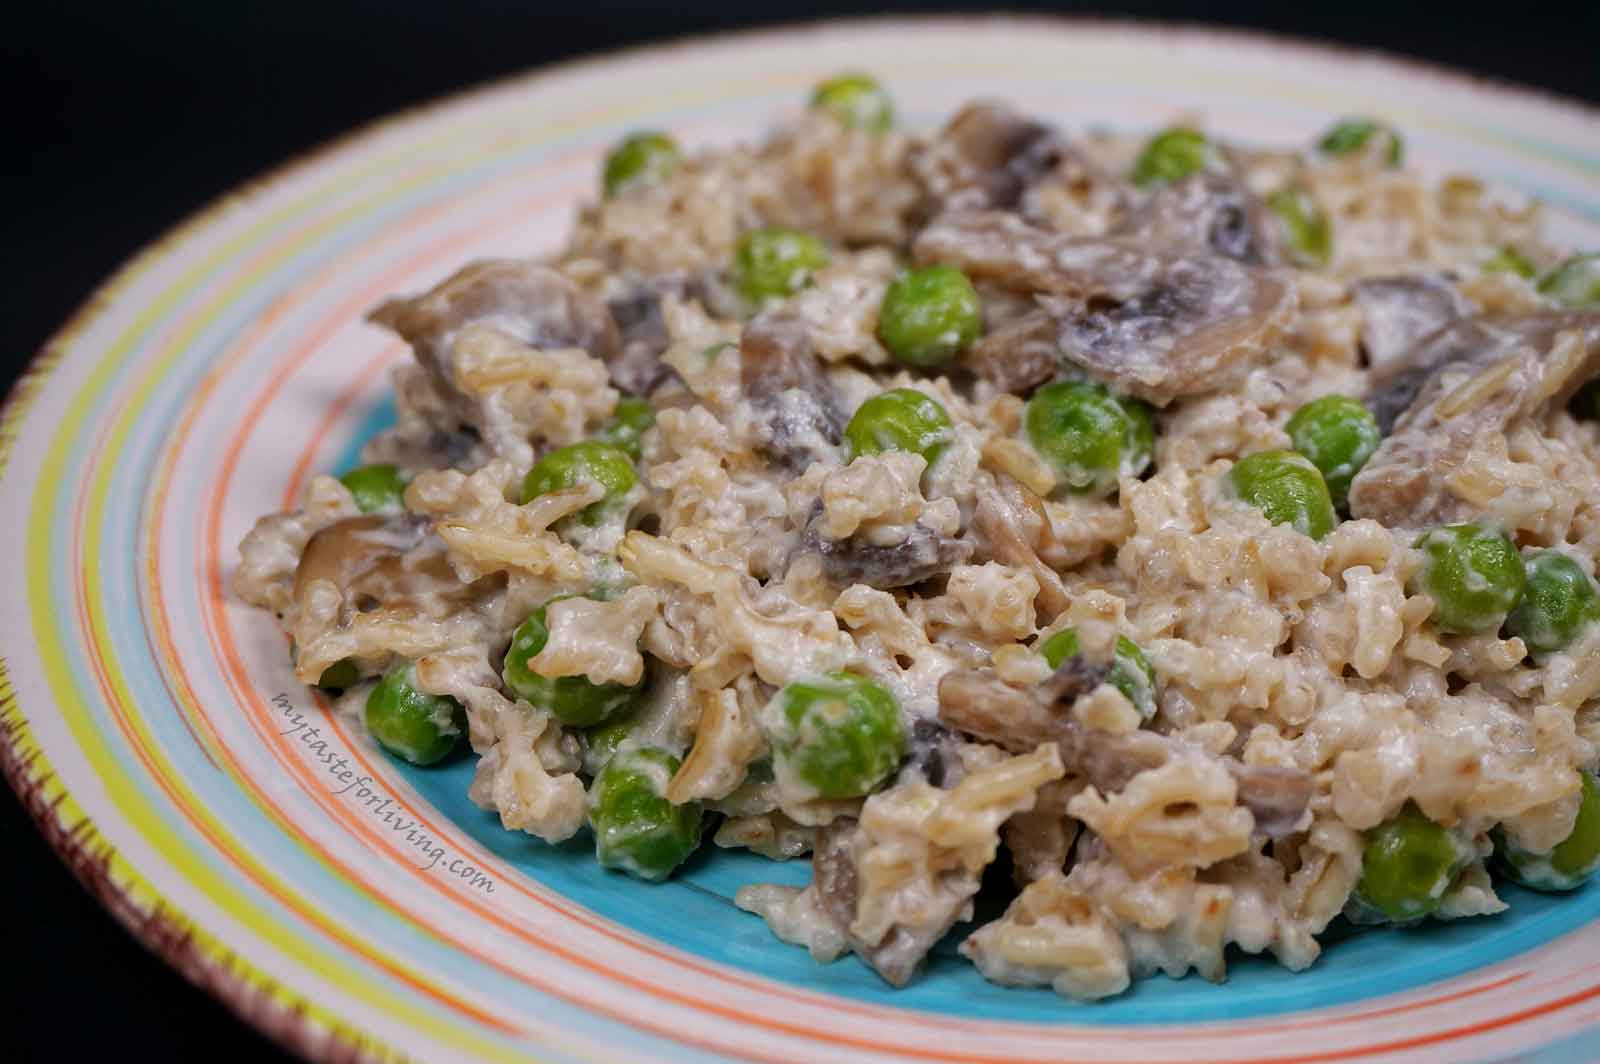 Delicious dish for lunch or dinner - rice prepared with mushrooms, peas, sour cream and cream cheese. I used brown basmati rice, but you can replace it with white or brown rice.